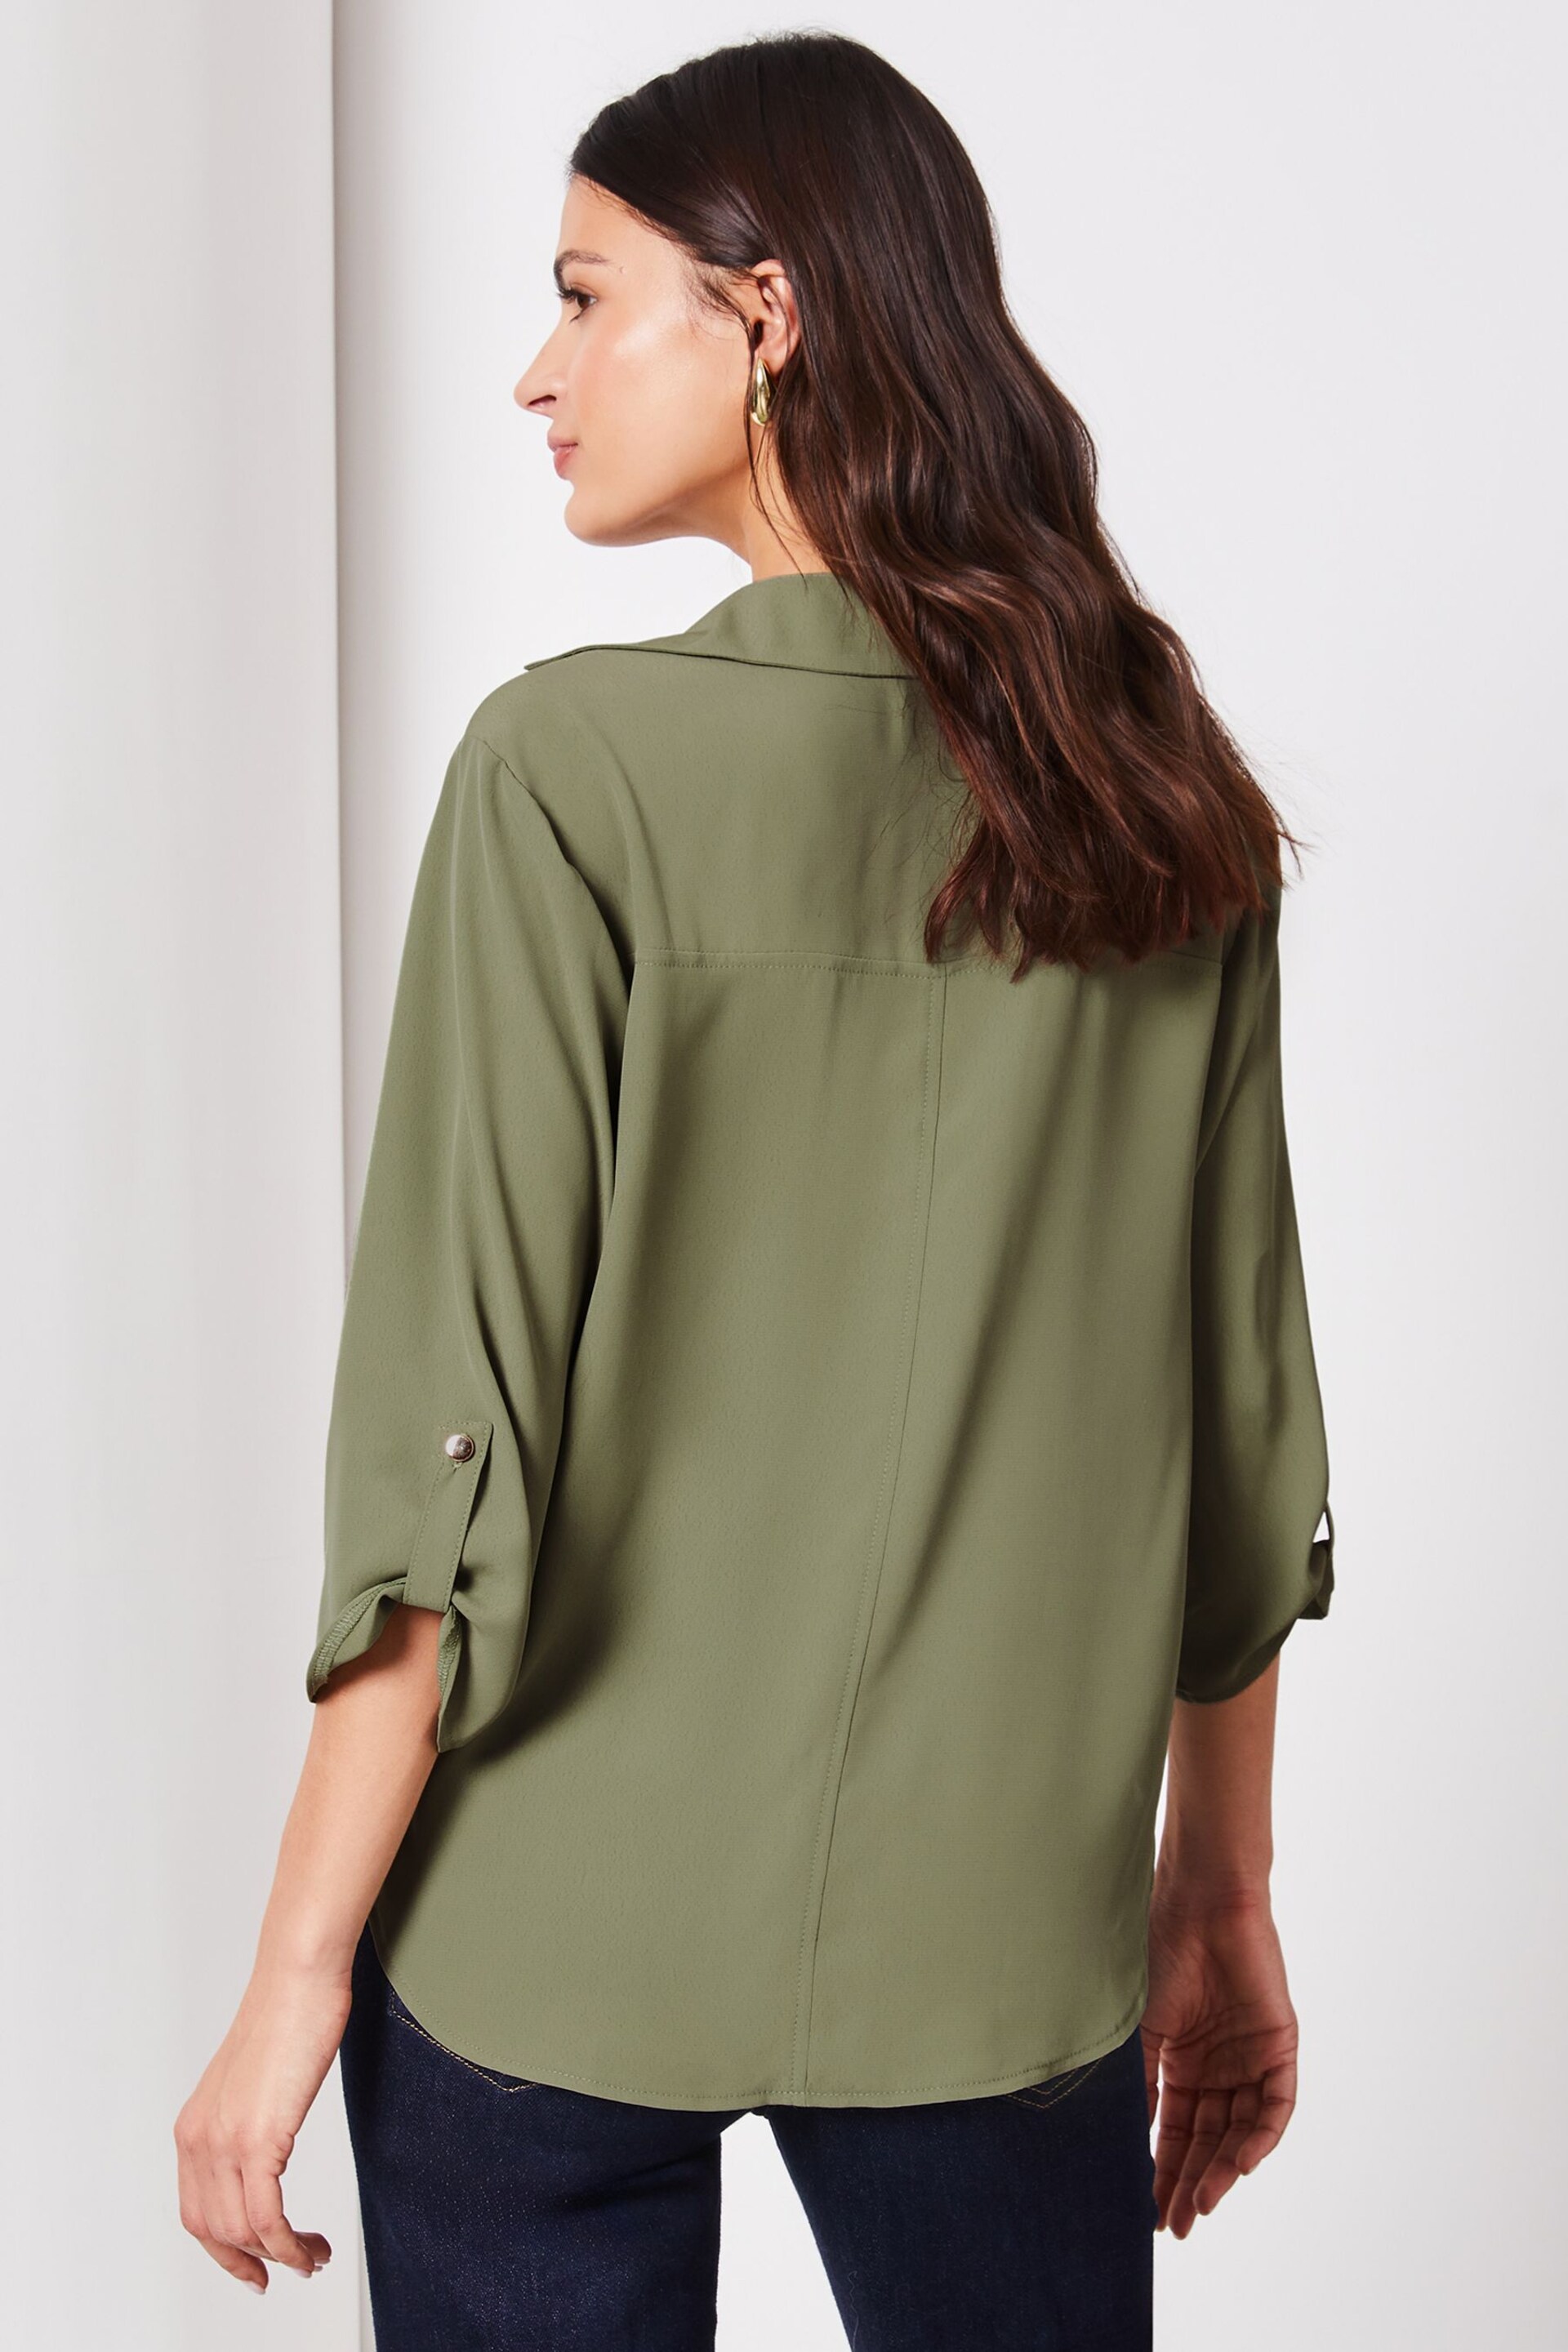 Lipsy Moss Green Petite V Neck 3/4 Sleeve Collared Blouse - Image 2 of 4